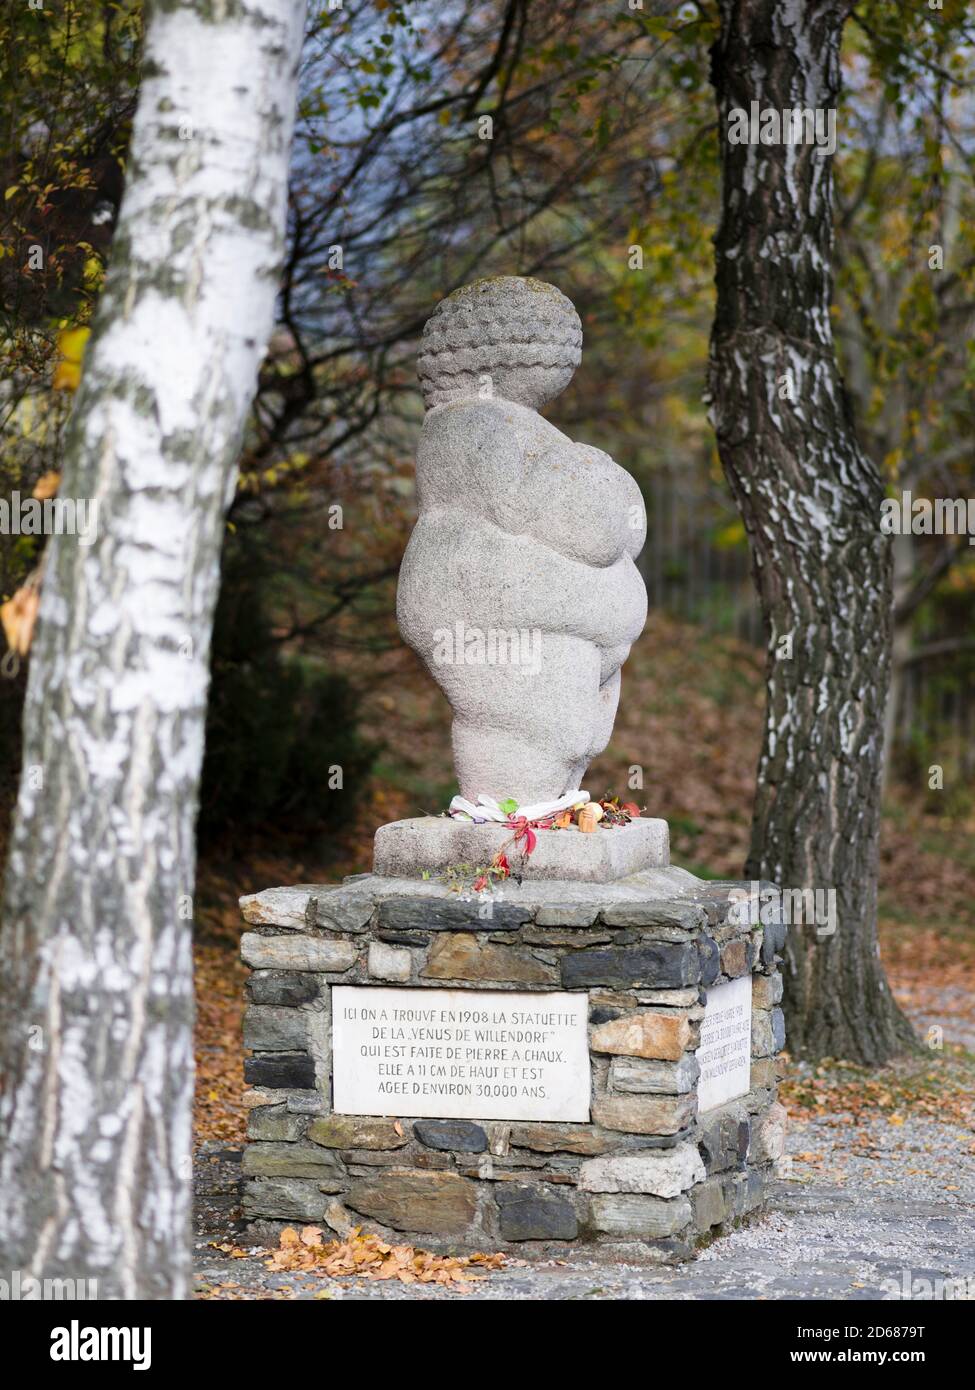 Place of discovery of the Venus von Willendorf (Woman of Willendorf) and a replica commemorating the find. the Venus is considered to be one of the ol Stock Photo